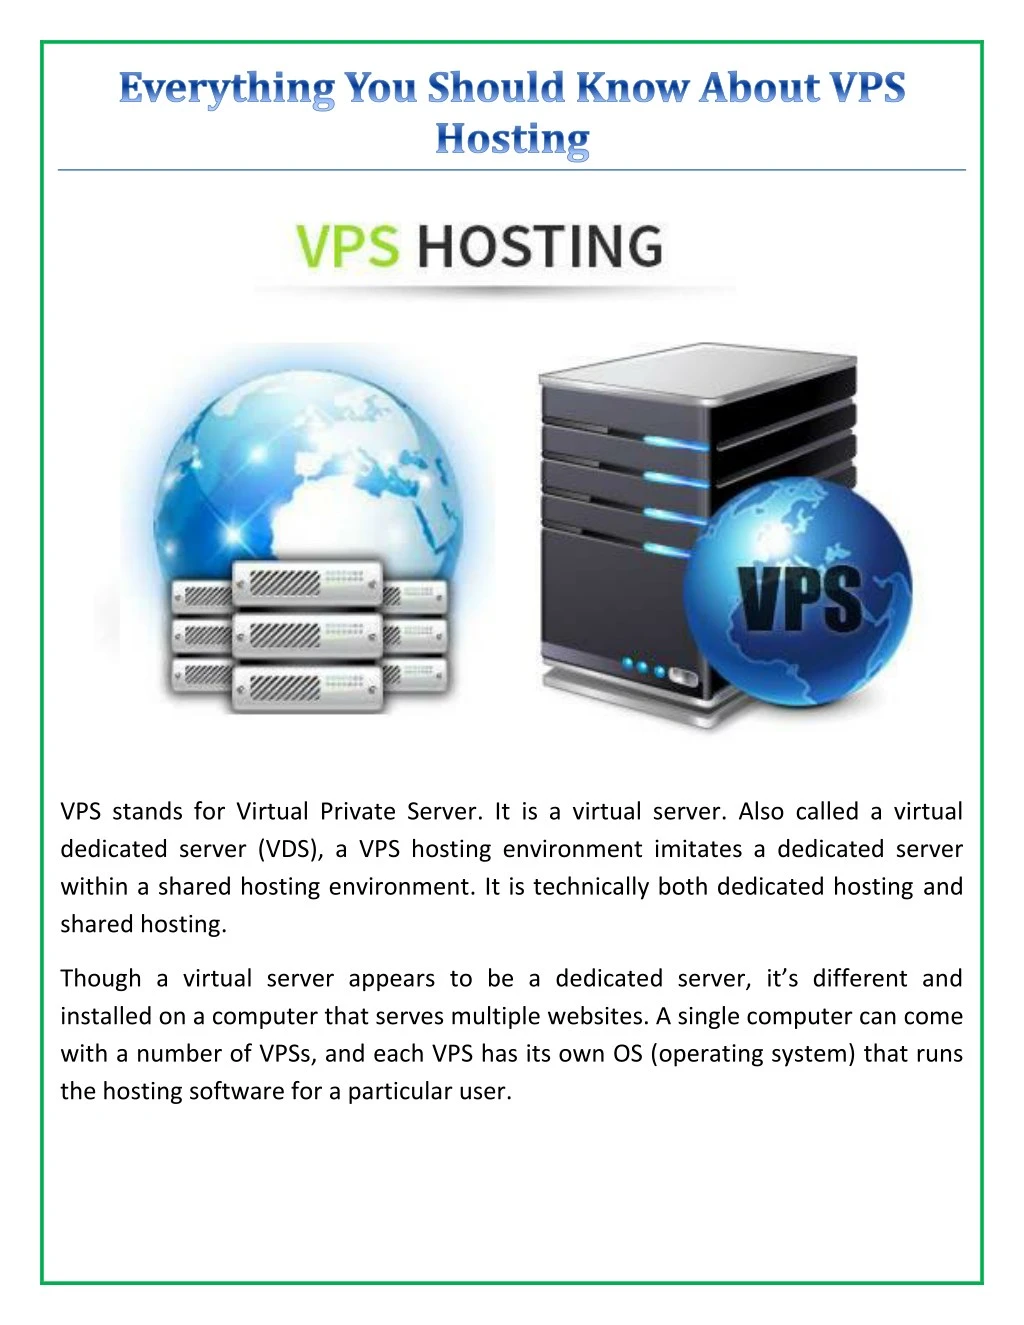 vps stands for virtual private server